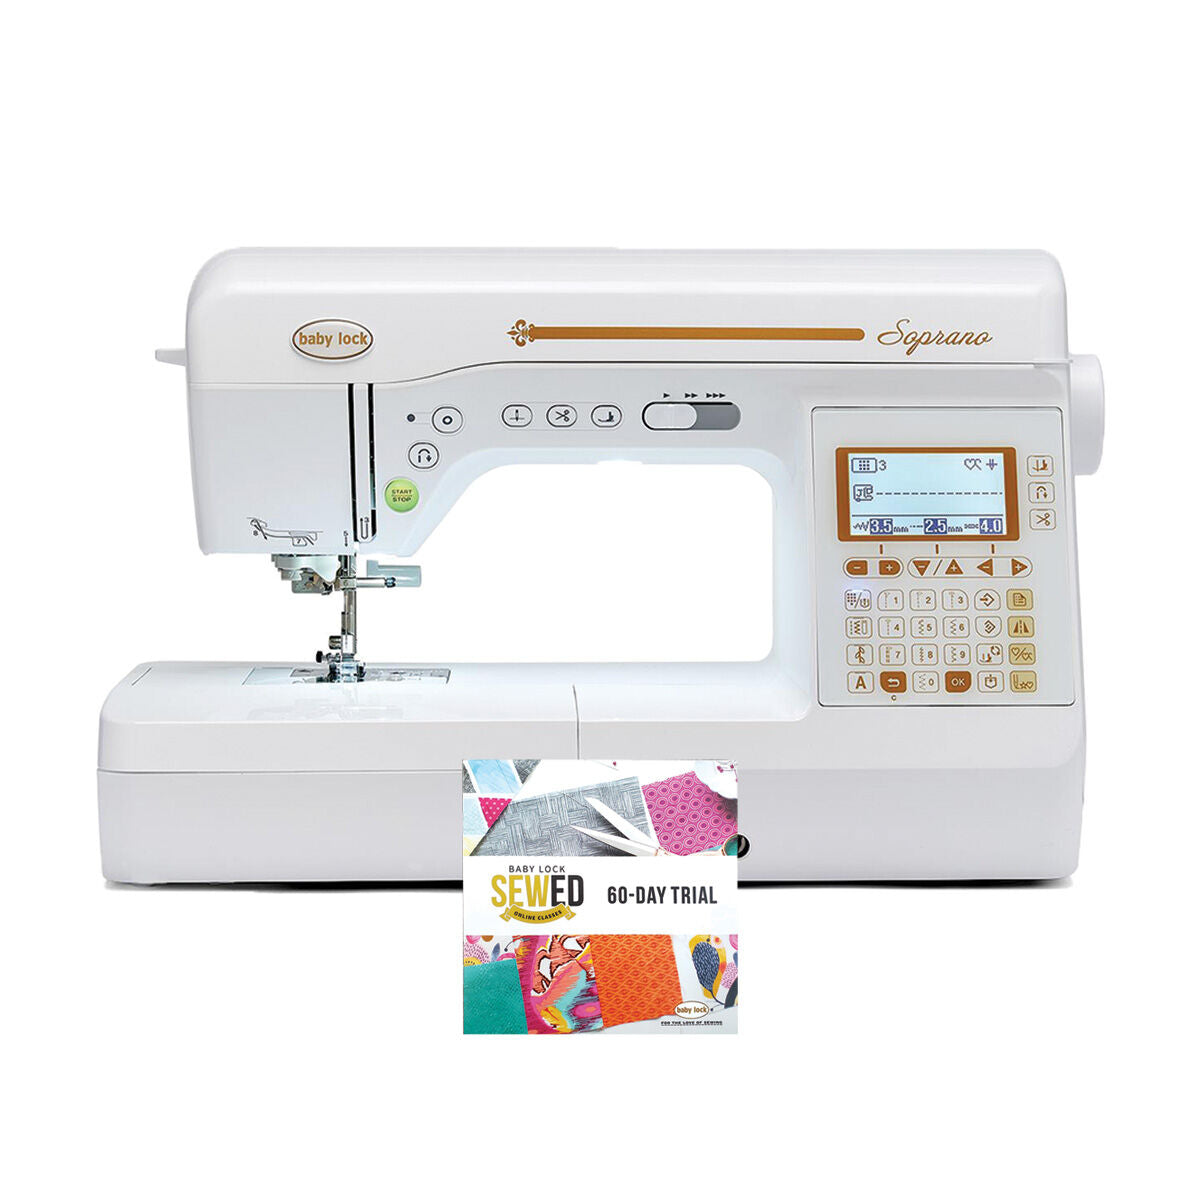 Baby Lock Soprano,Baby Lock Soprano Sewing Machine - with FREE Gifts (SF3QEFS + 804BLTK20 + BA-BLMSP),Baby Lock Soprano Automatic Fabric Sensor System,Baby Lock Soprano Extension Table
,Baby Lock Soprano Push Button Feature,Baby Lock Soprano Advanced Pivoting Feature,Baby Lock Soprano Top Loading Bobbin,Baby Lock Soprano Sewing & Quilting Machine,Baby Lock Soprano Sewing & Quilting Machine 